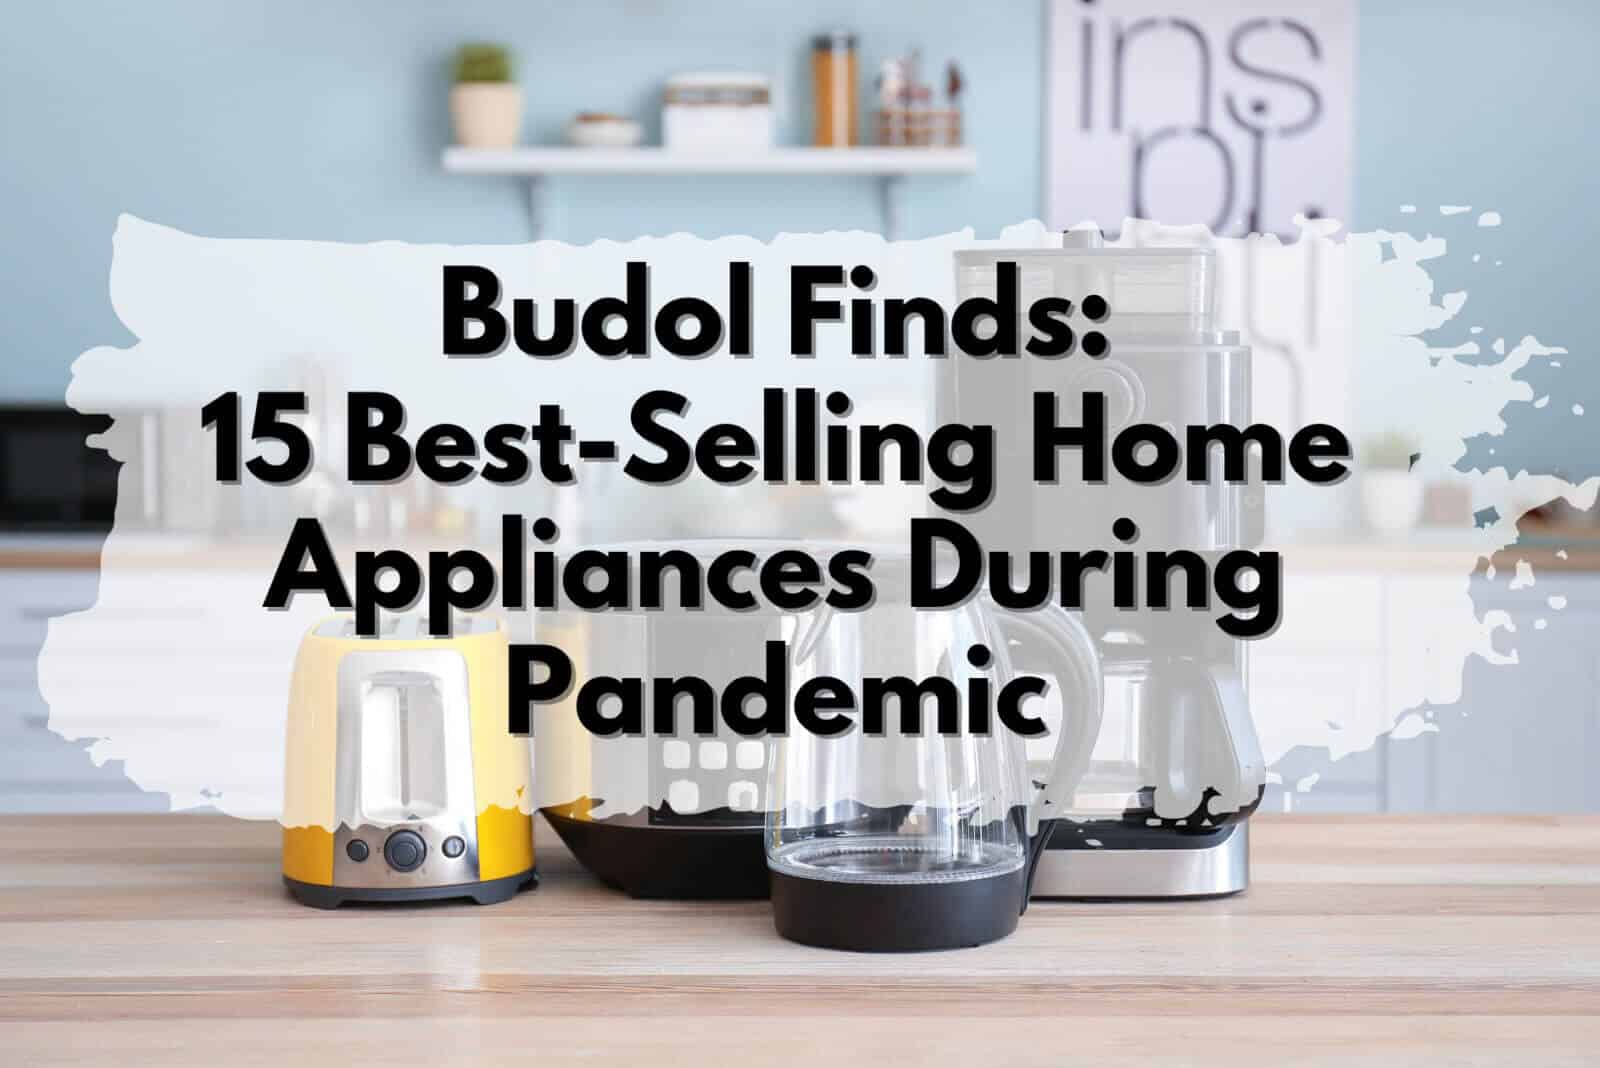 Budol Finds: 15 Best-Selling Home Appliances During Pandemic